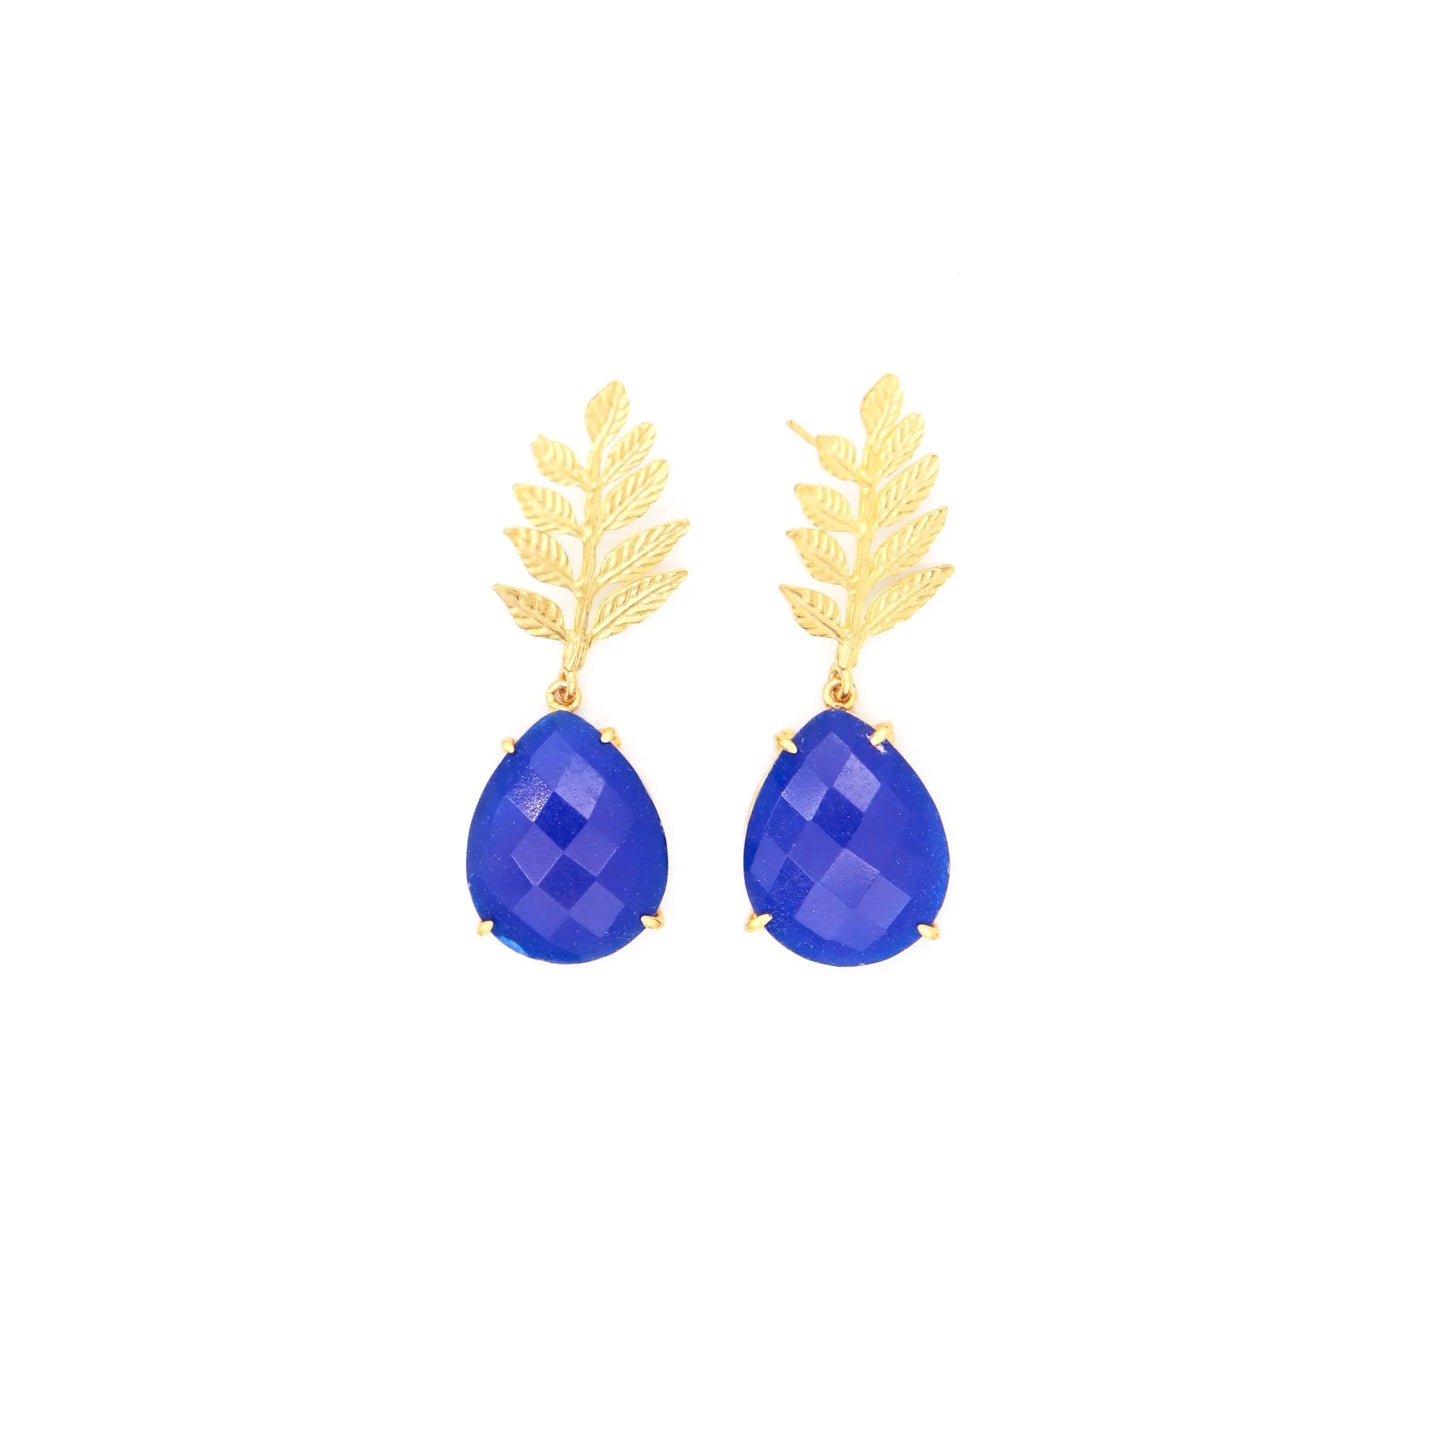 Limited Edition Brass Earrings - Lady D Jewels